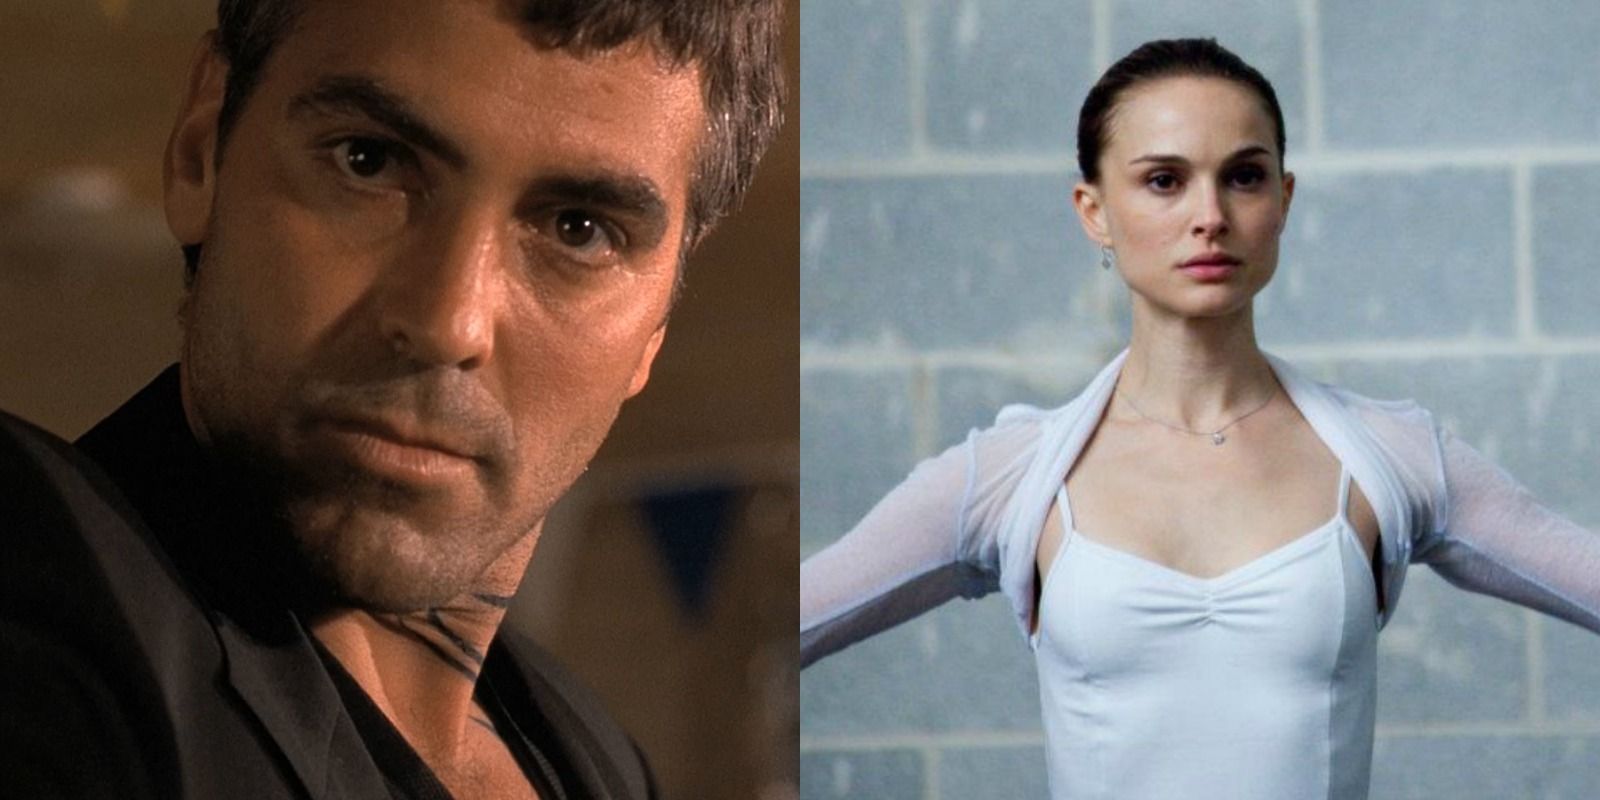 Split image of From Dusk Till Dawn and Black Swan